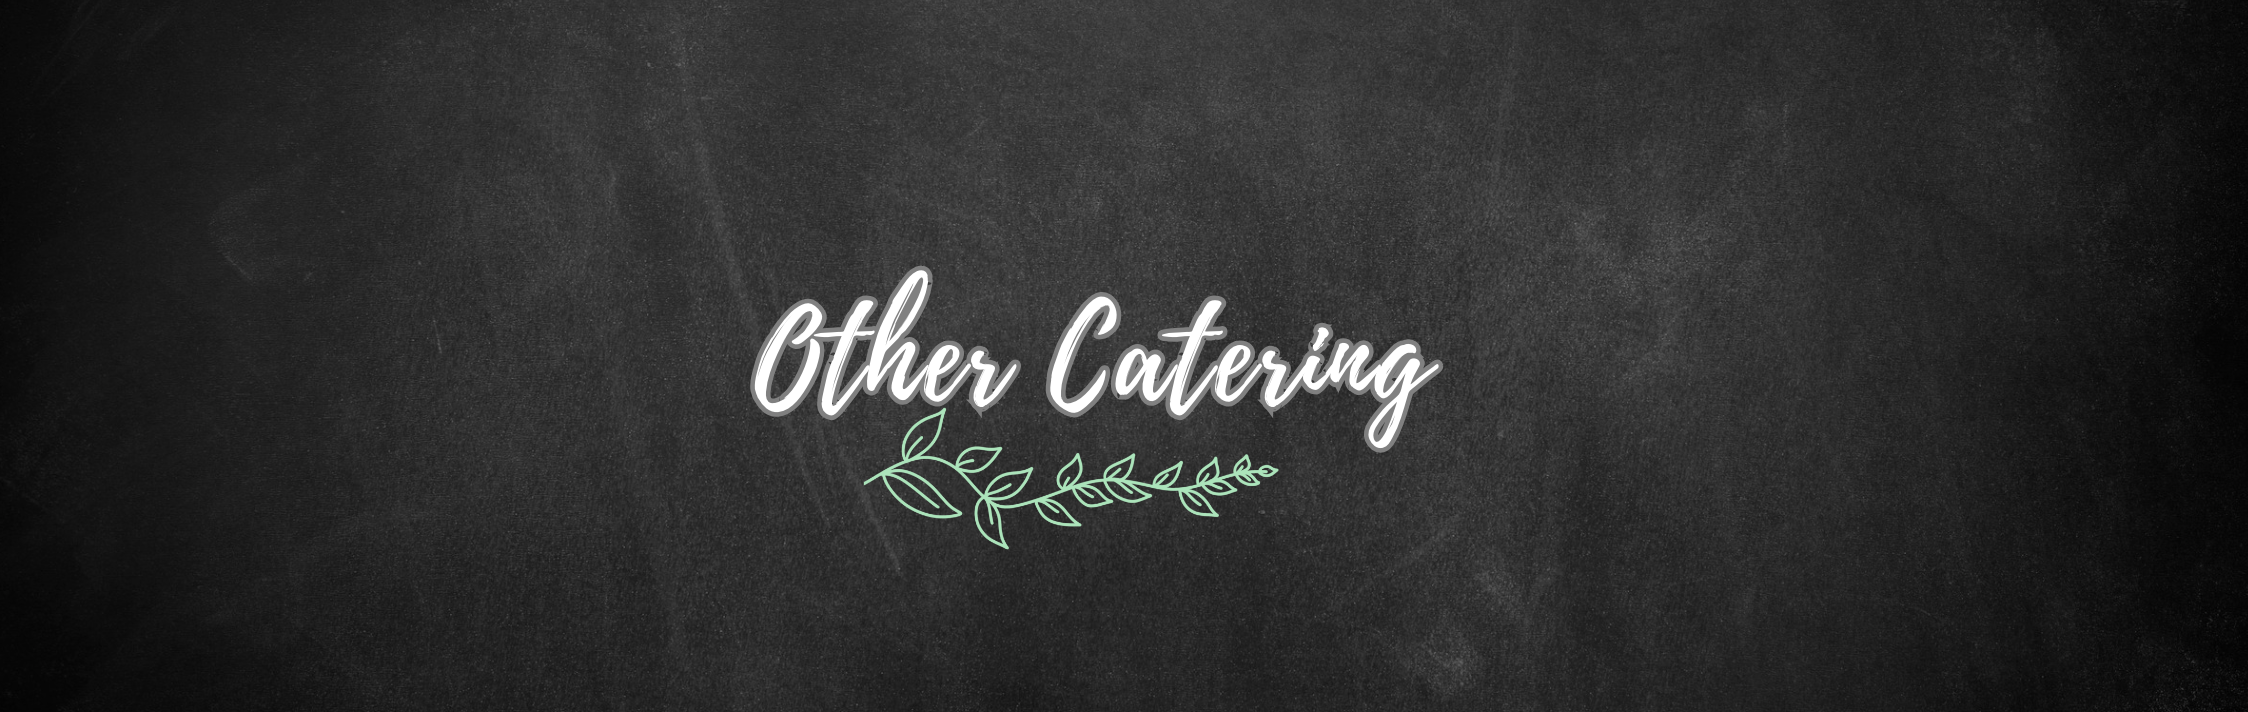 other catering